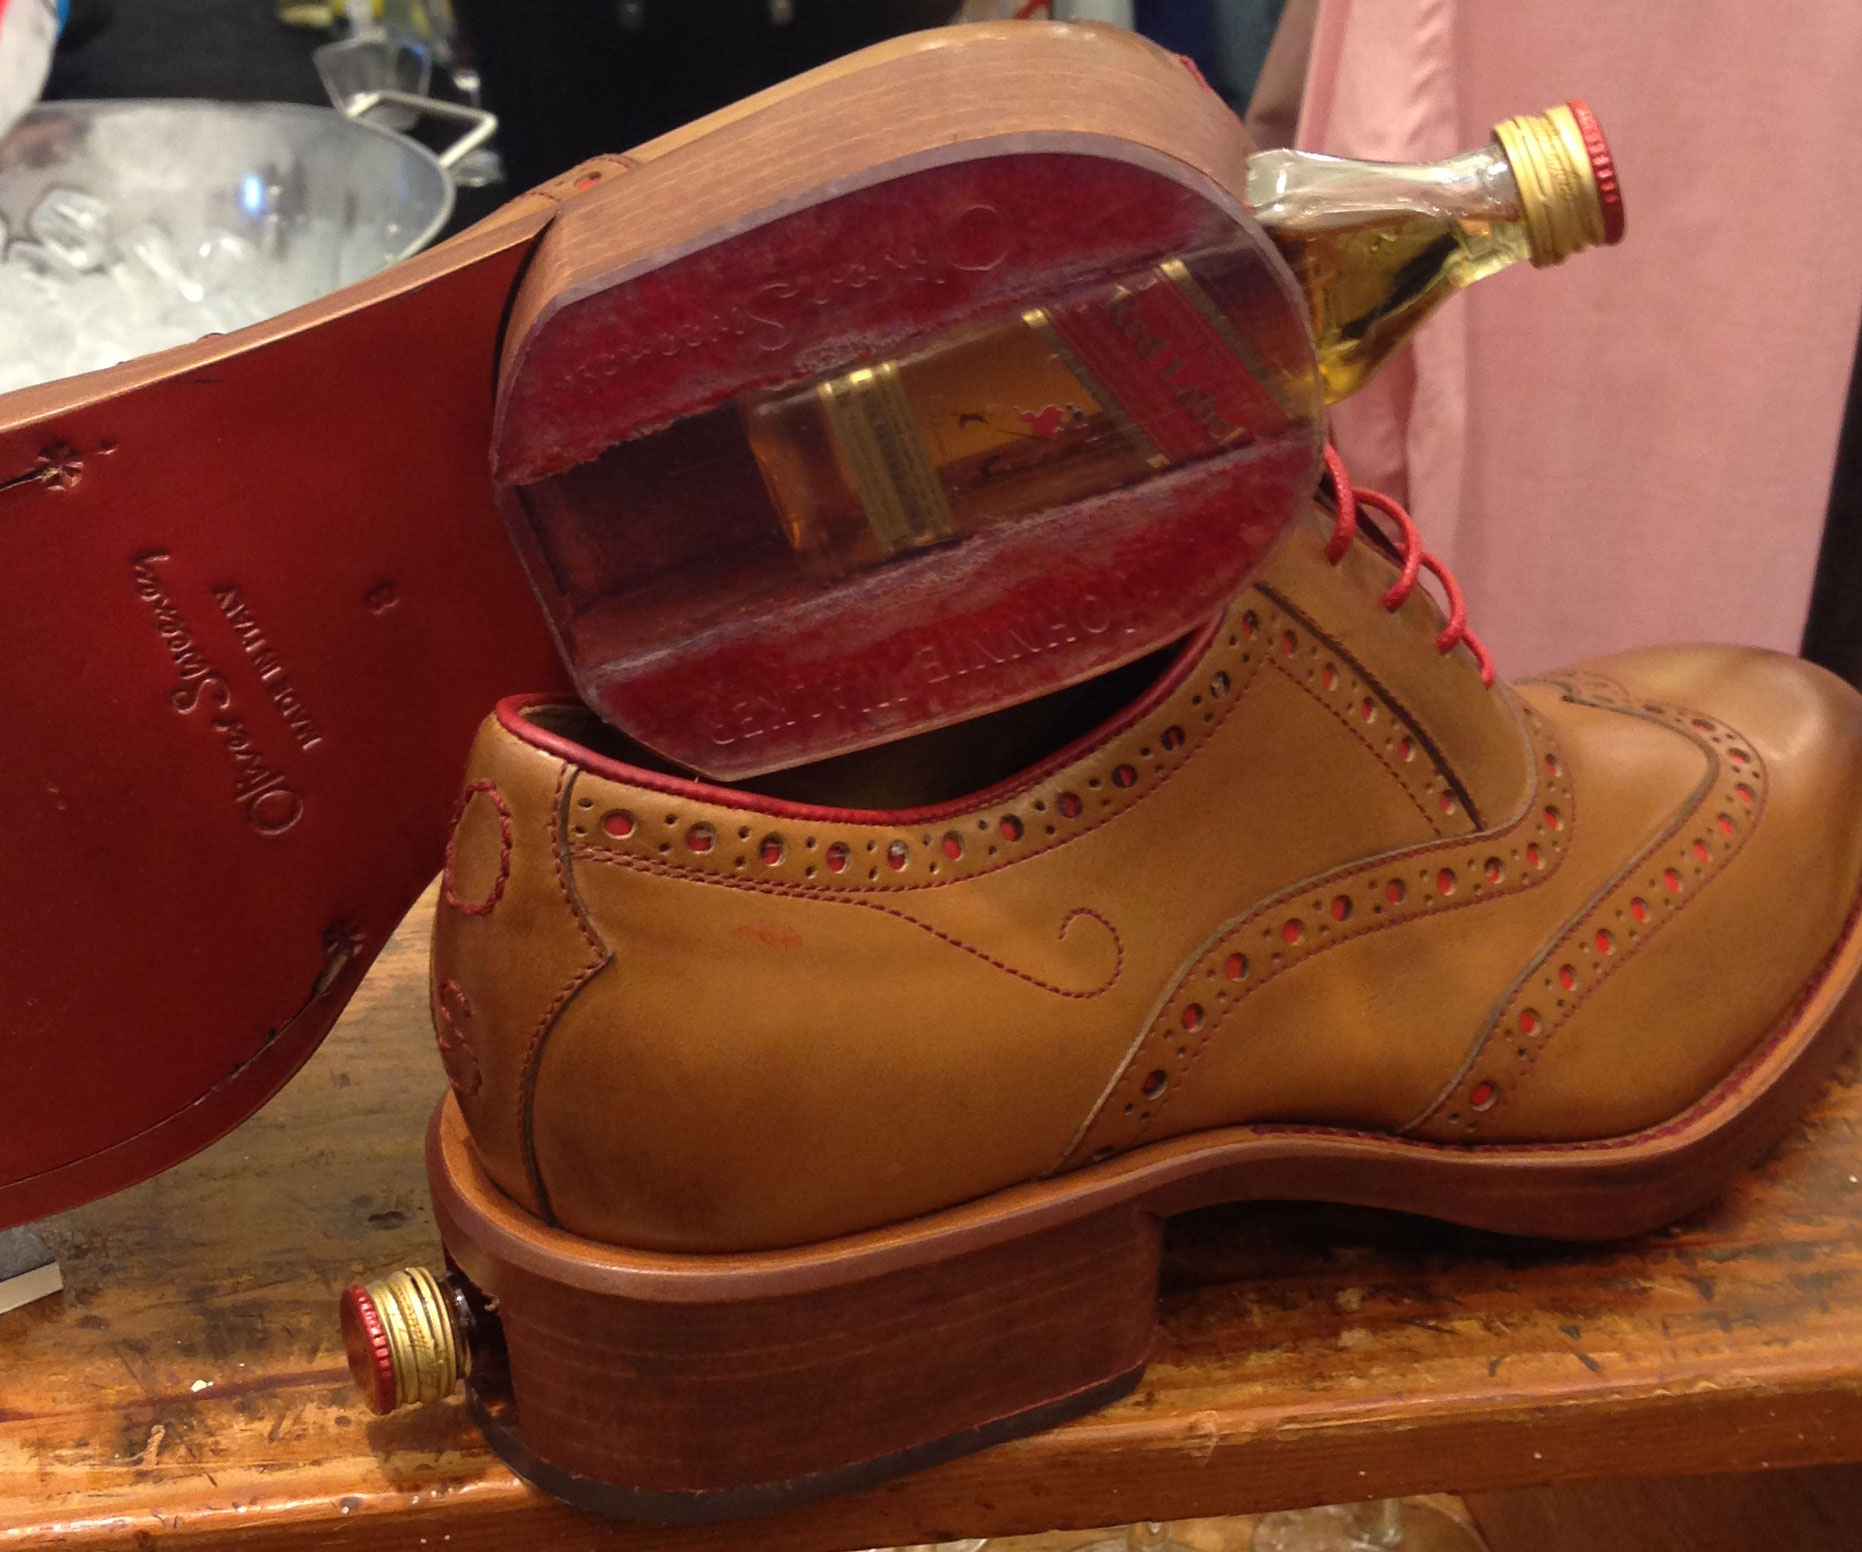 Whiskey Bottle Compartment Shoes